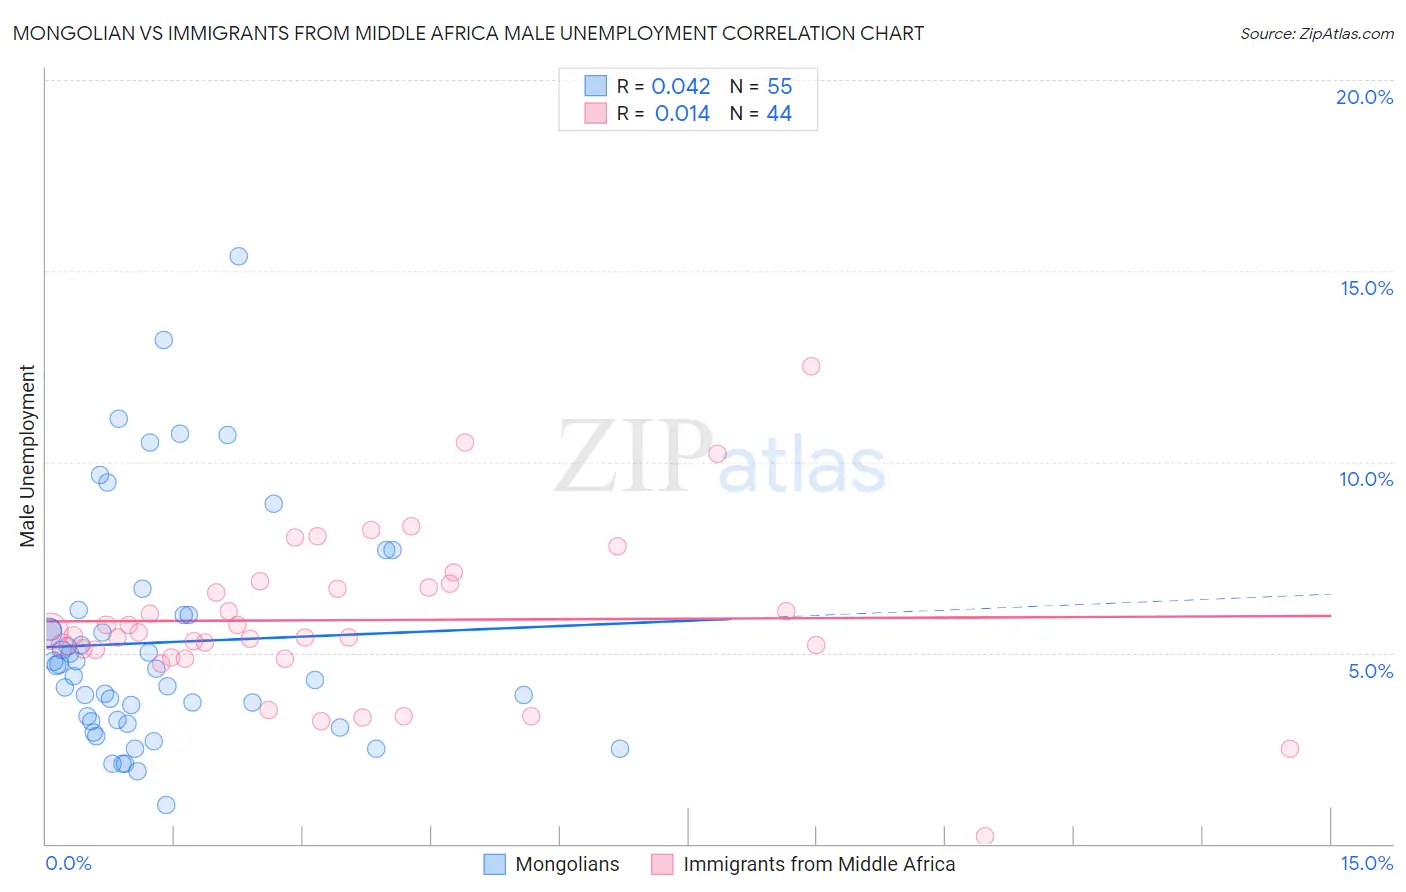 Mongolian vs Immigrants from Middle Africa Male Unemployment